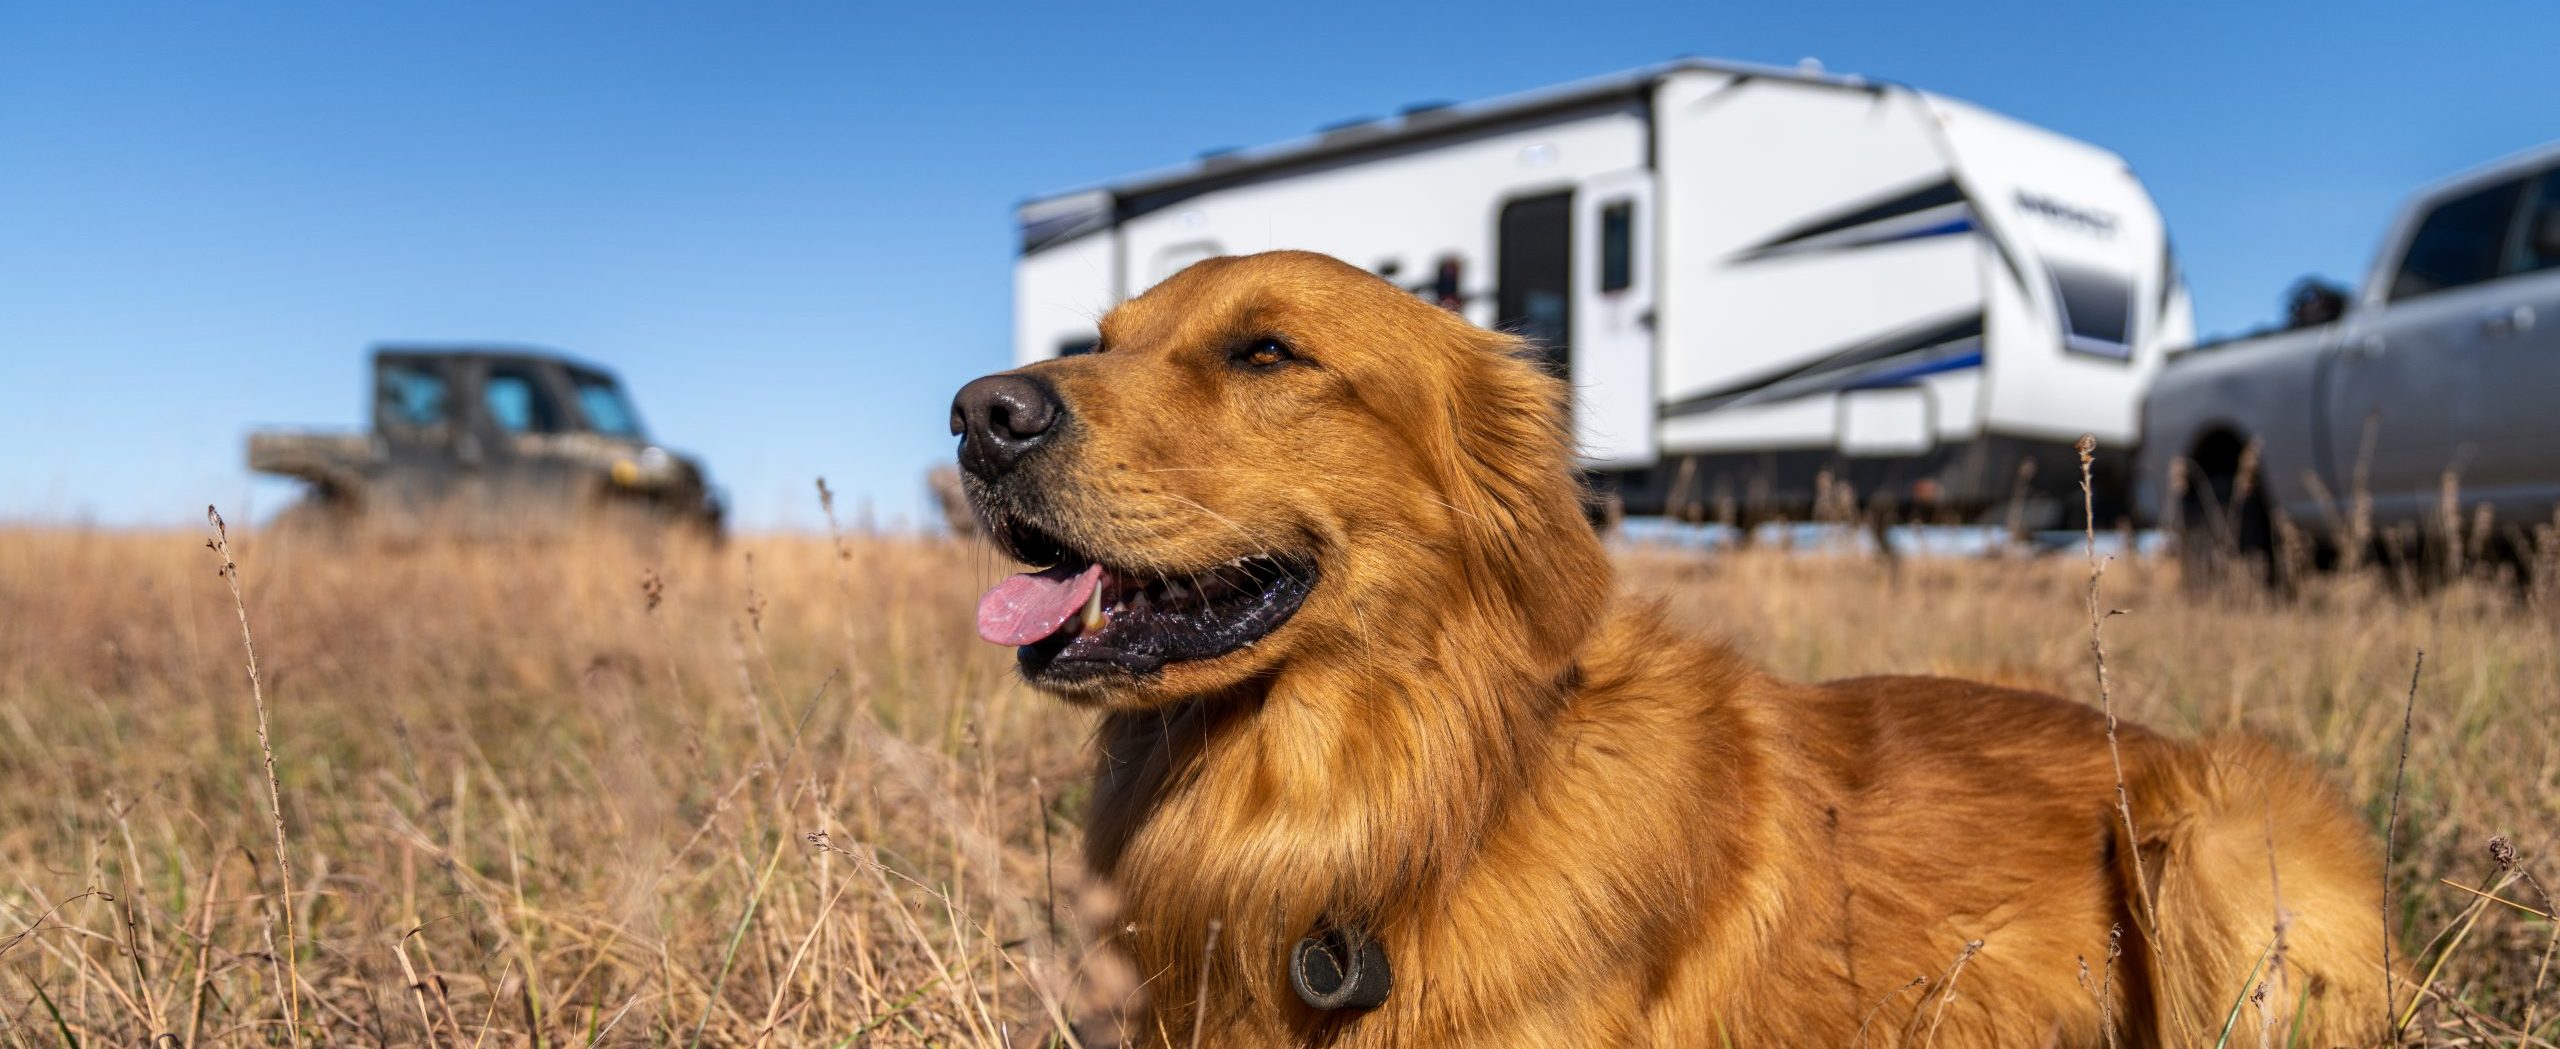 Dog in a Field with RV